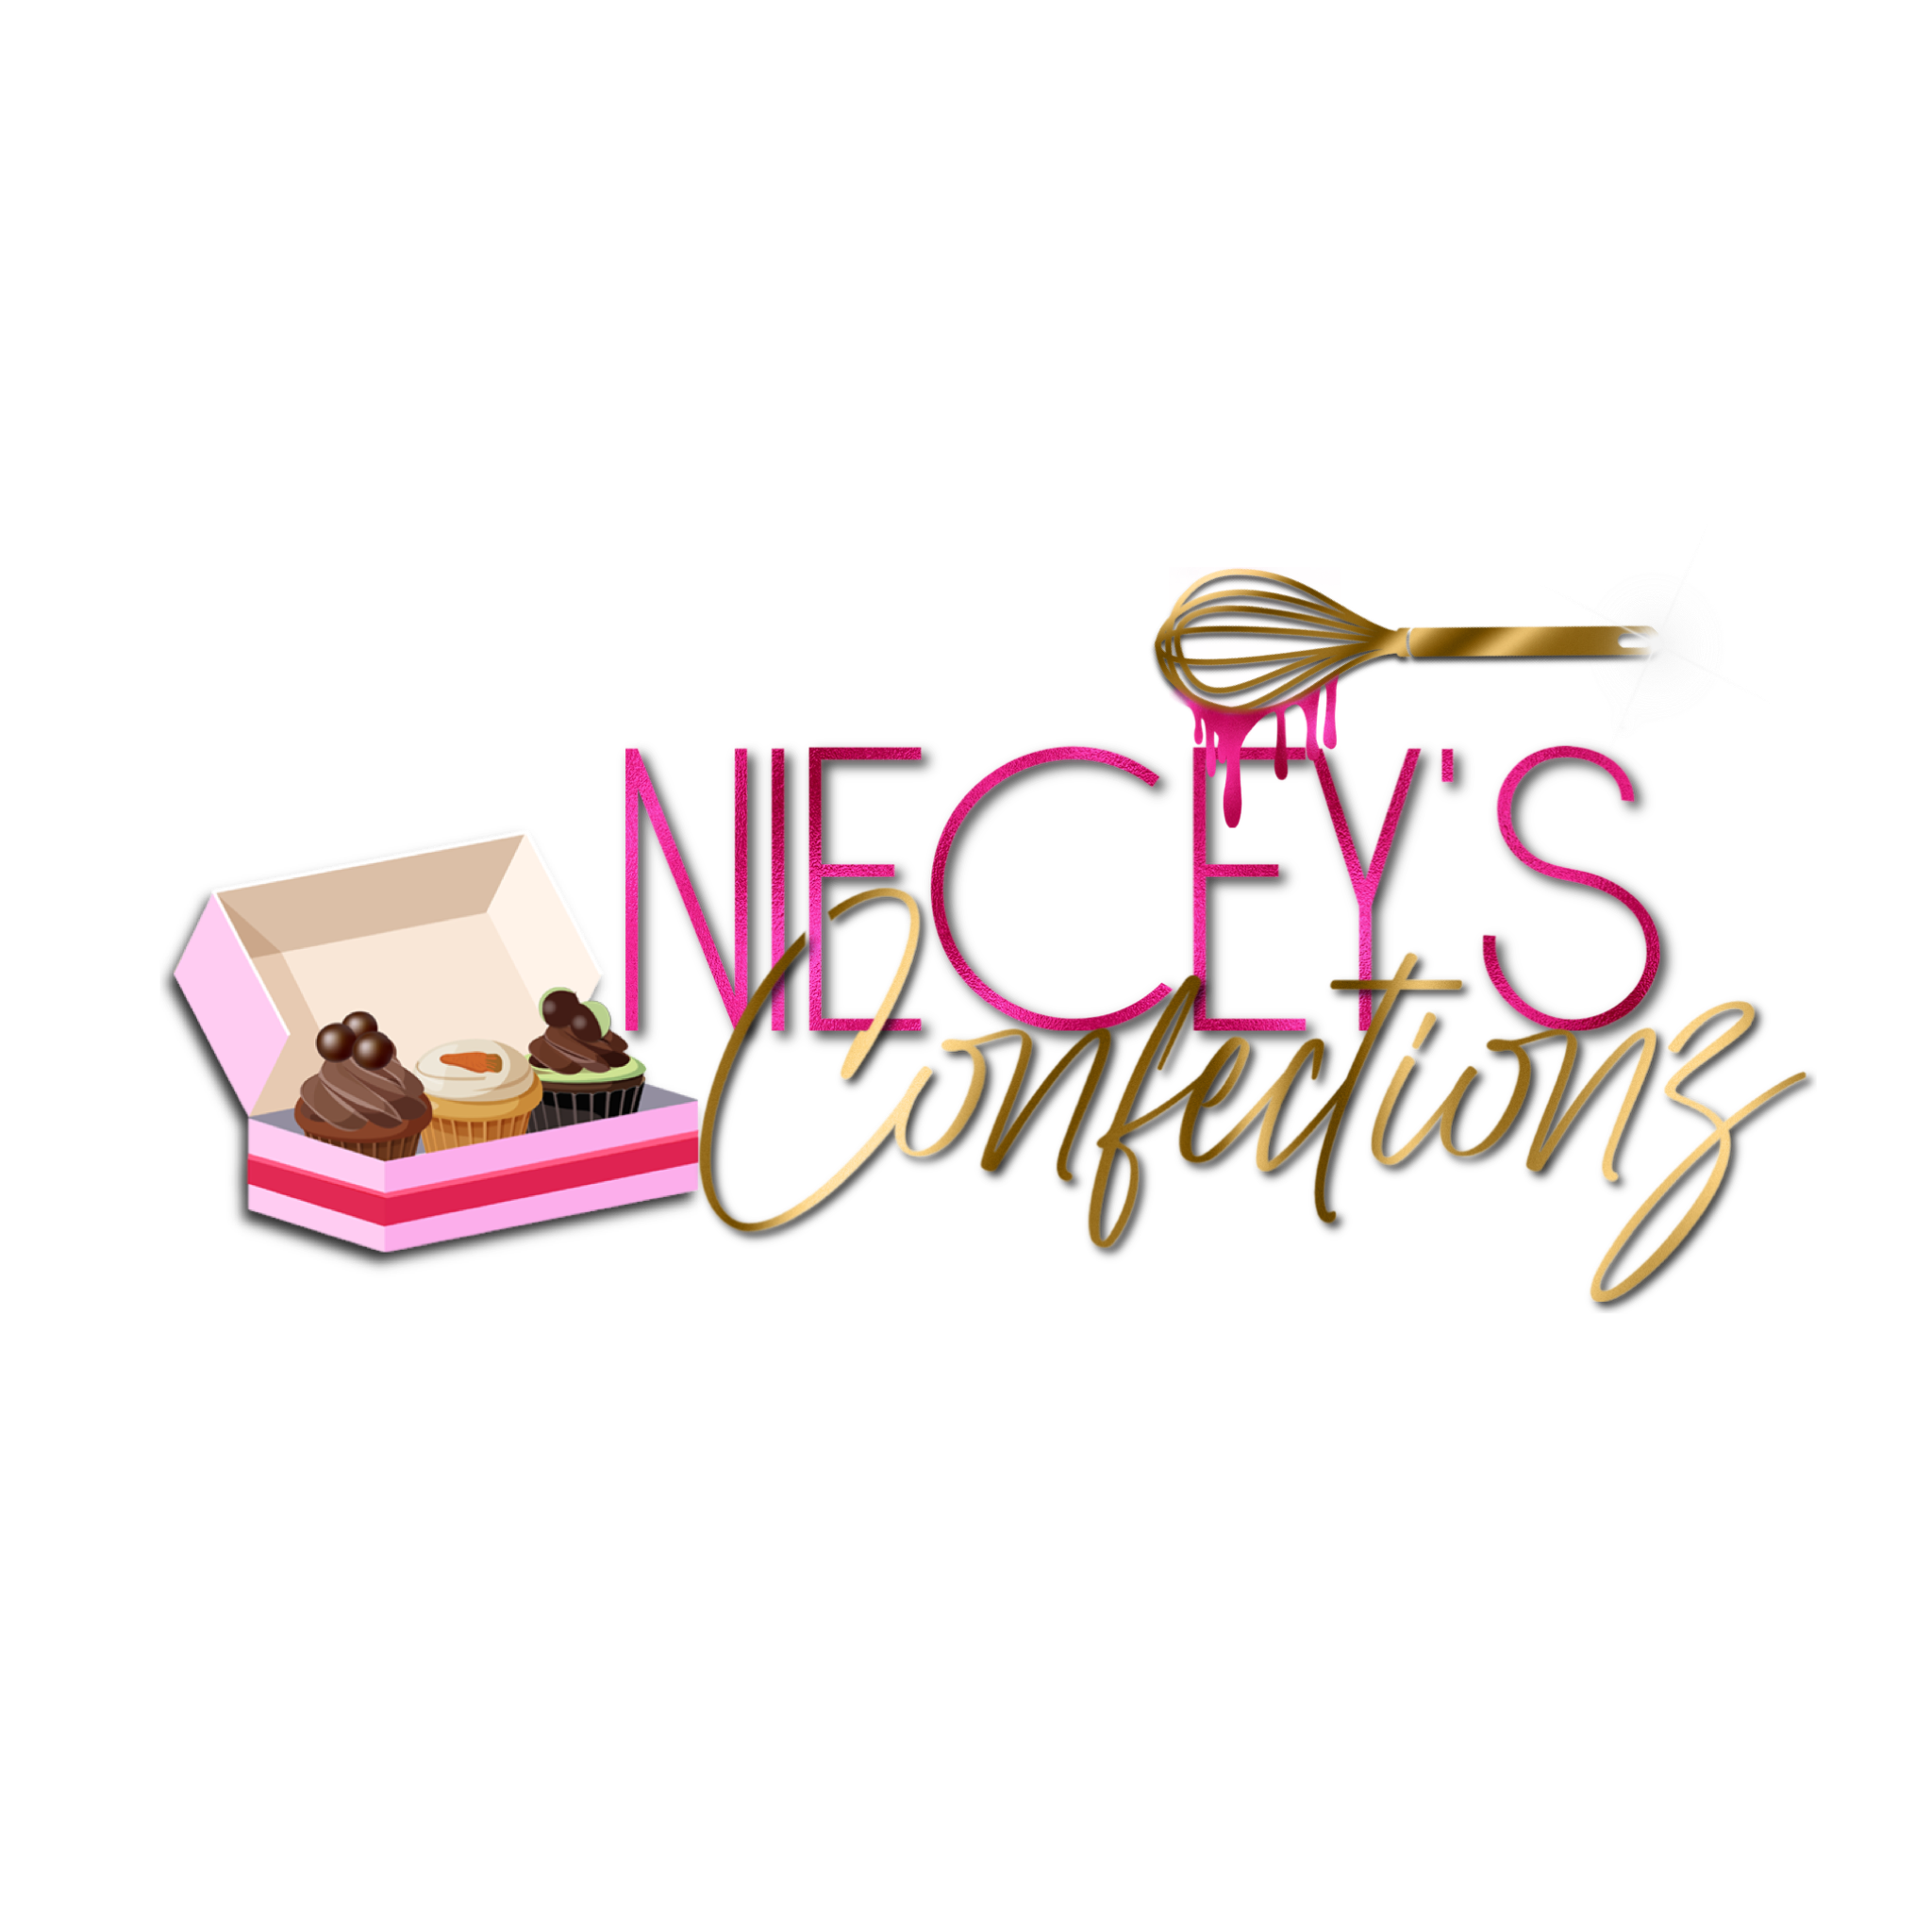 Niecey’s Confectionz